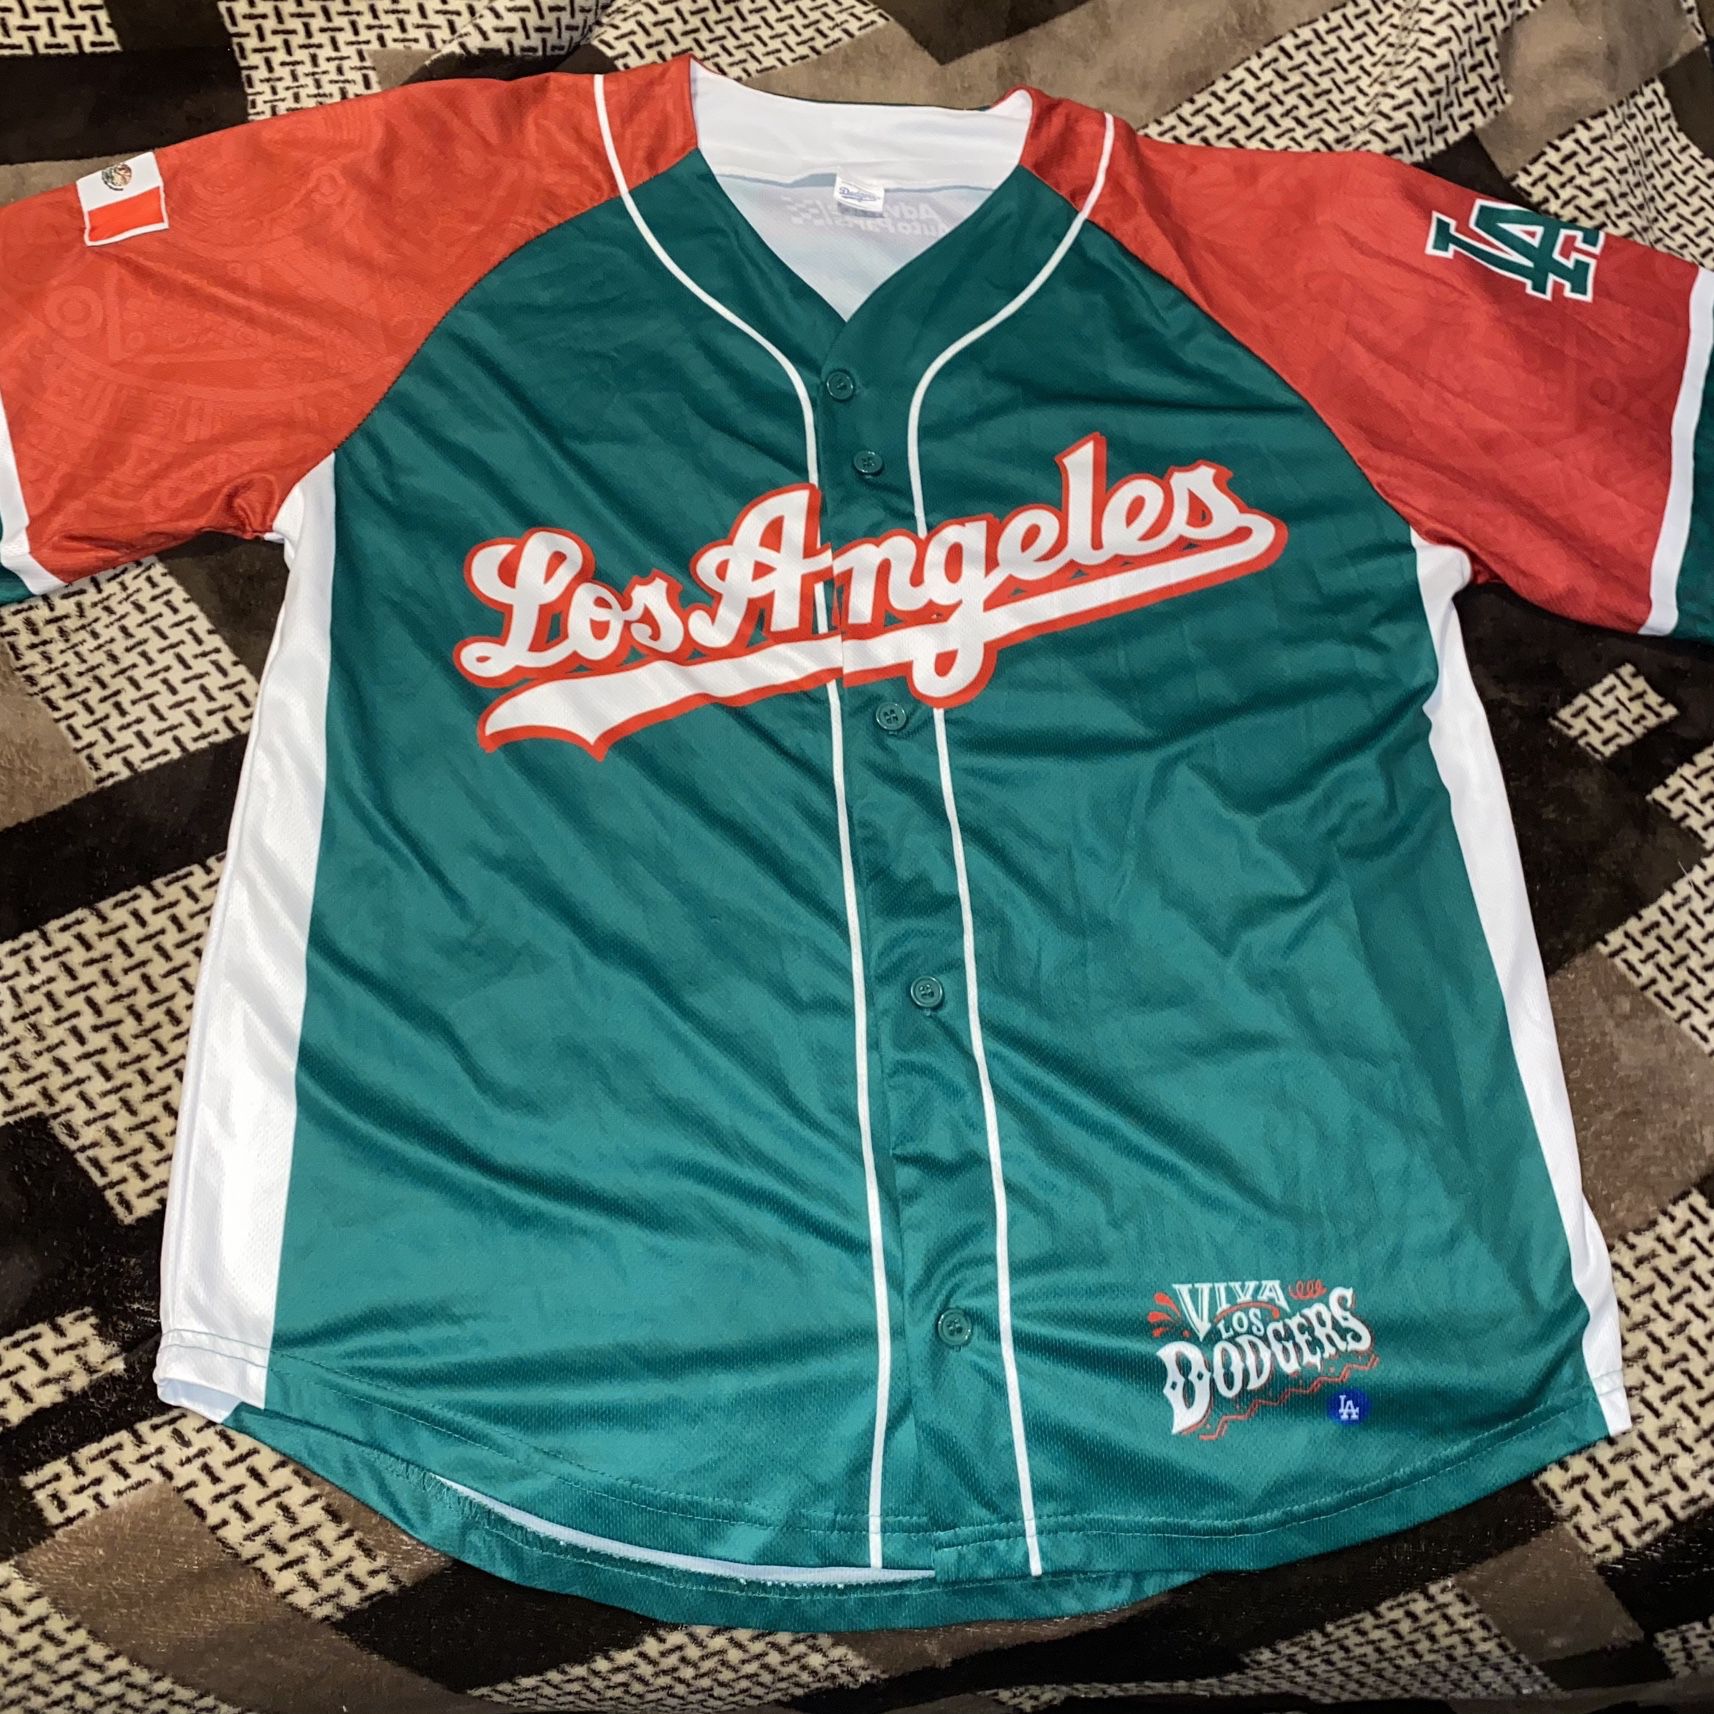 Los Angeles Dodgers Mexican Heritage Jersey for Sale in Fontana